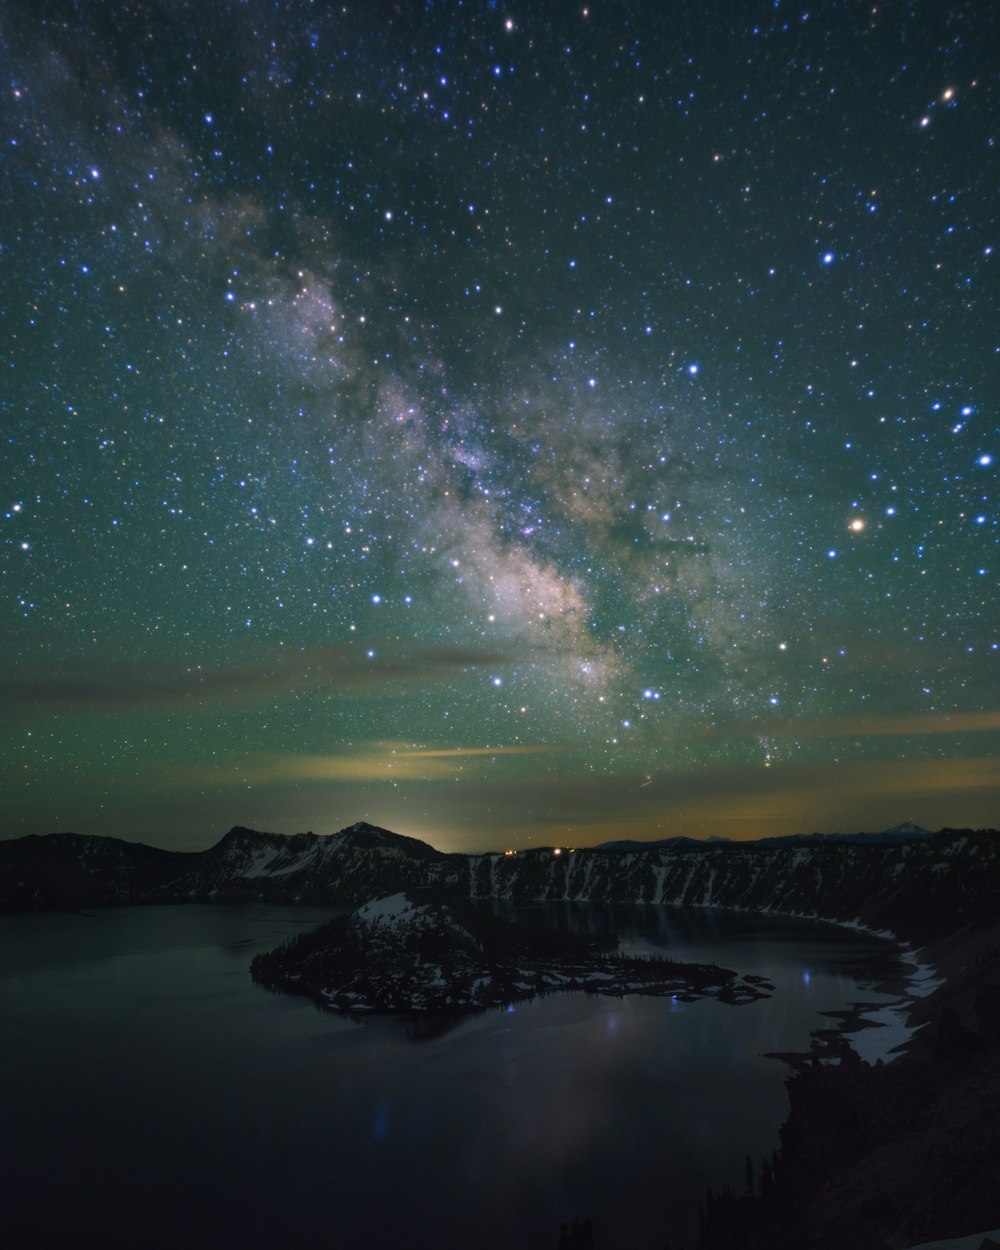 the night sky with stars above a lake